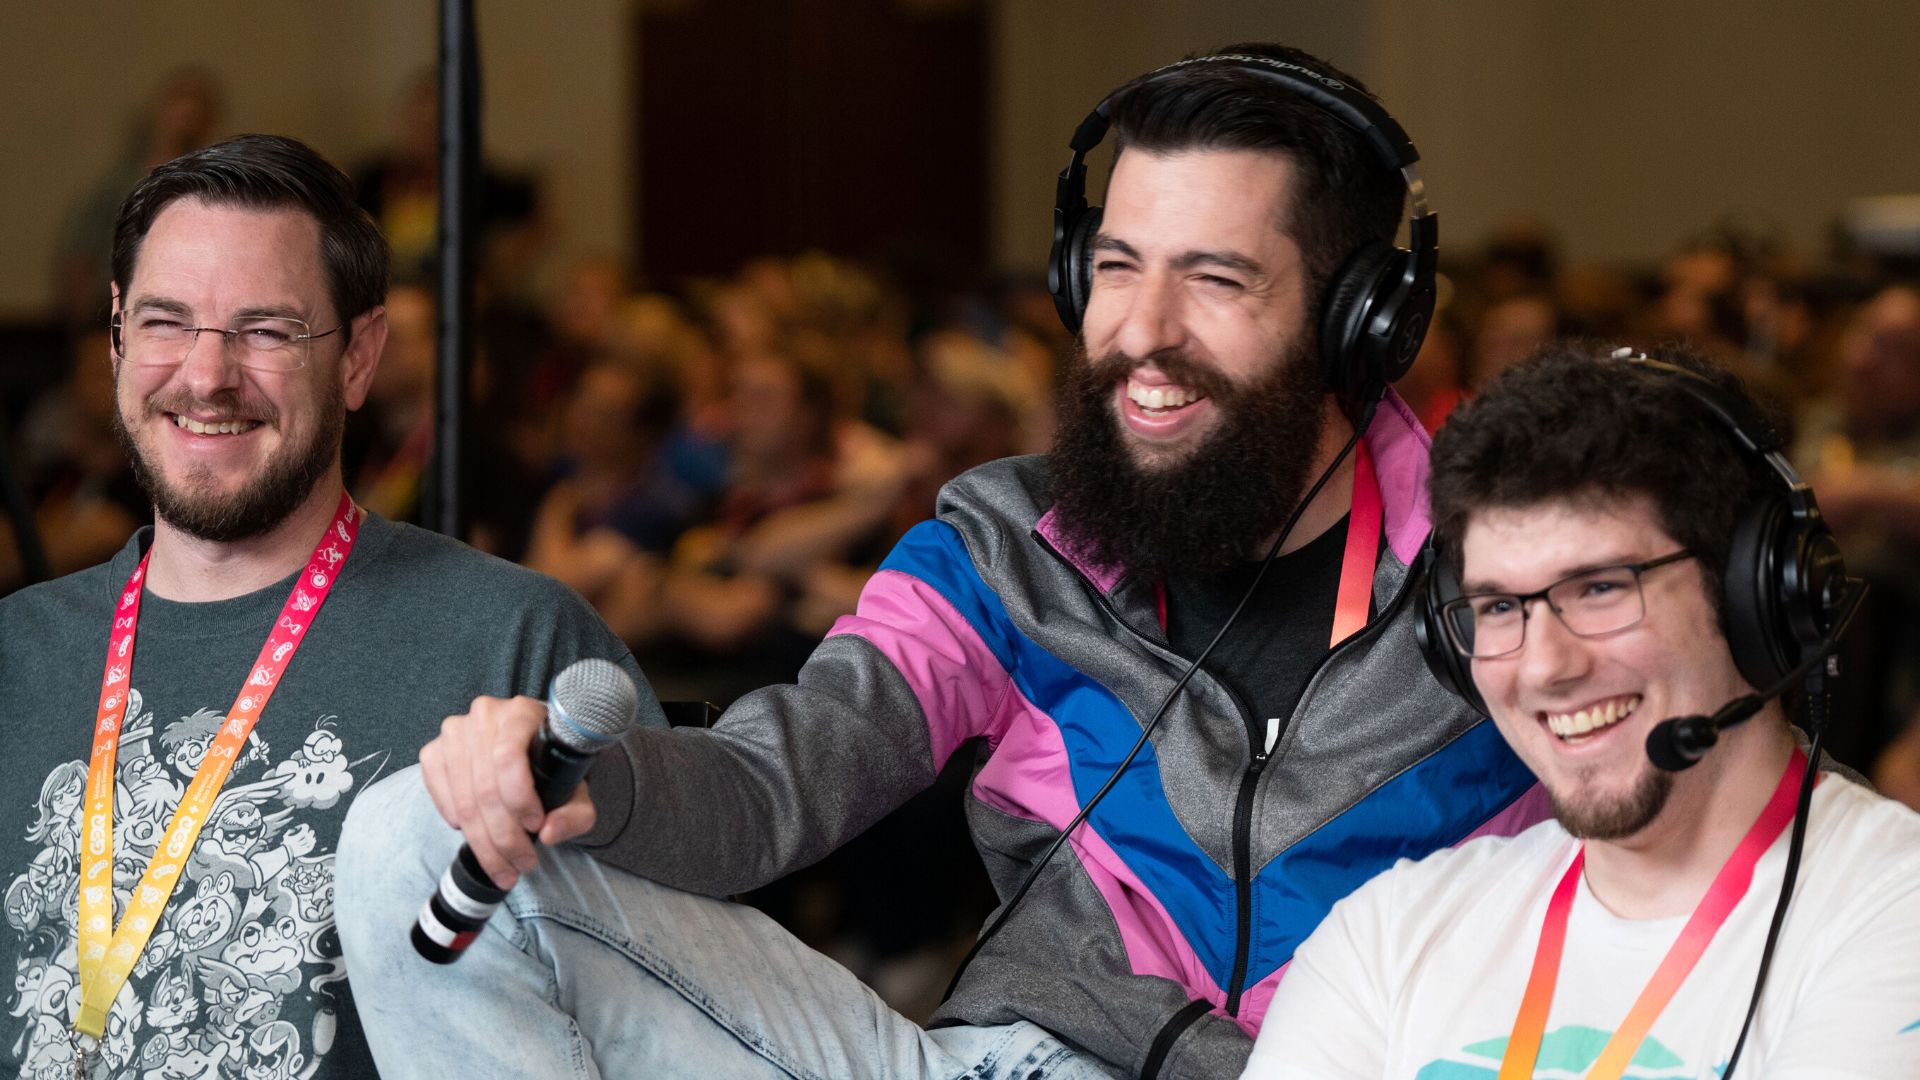 AGDQ 2023 will be online due to Florida’s LGBTQ+ and COVID19 policies